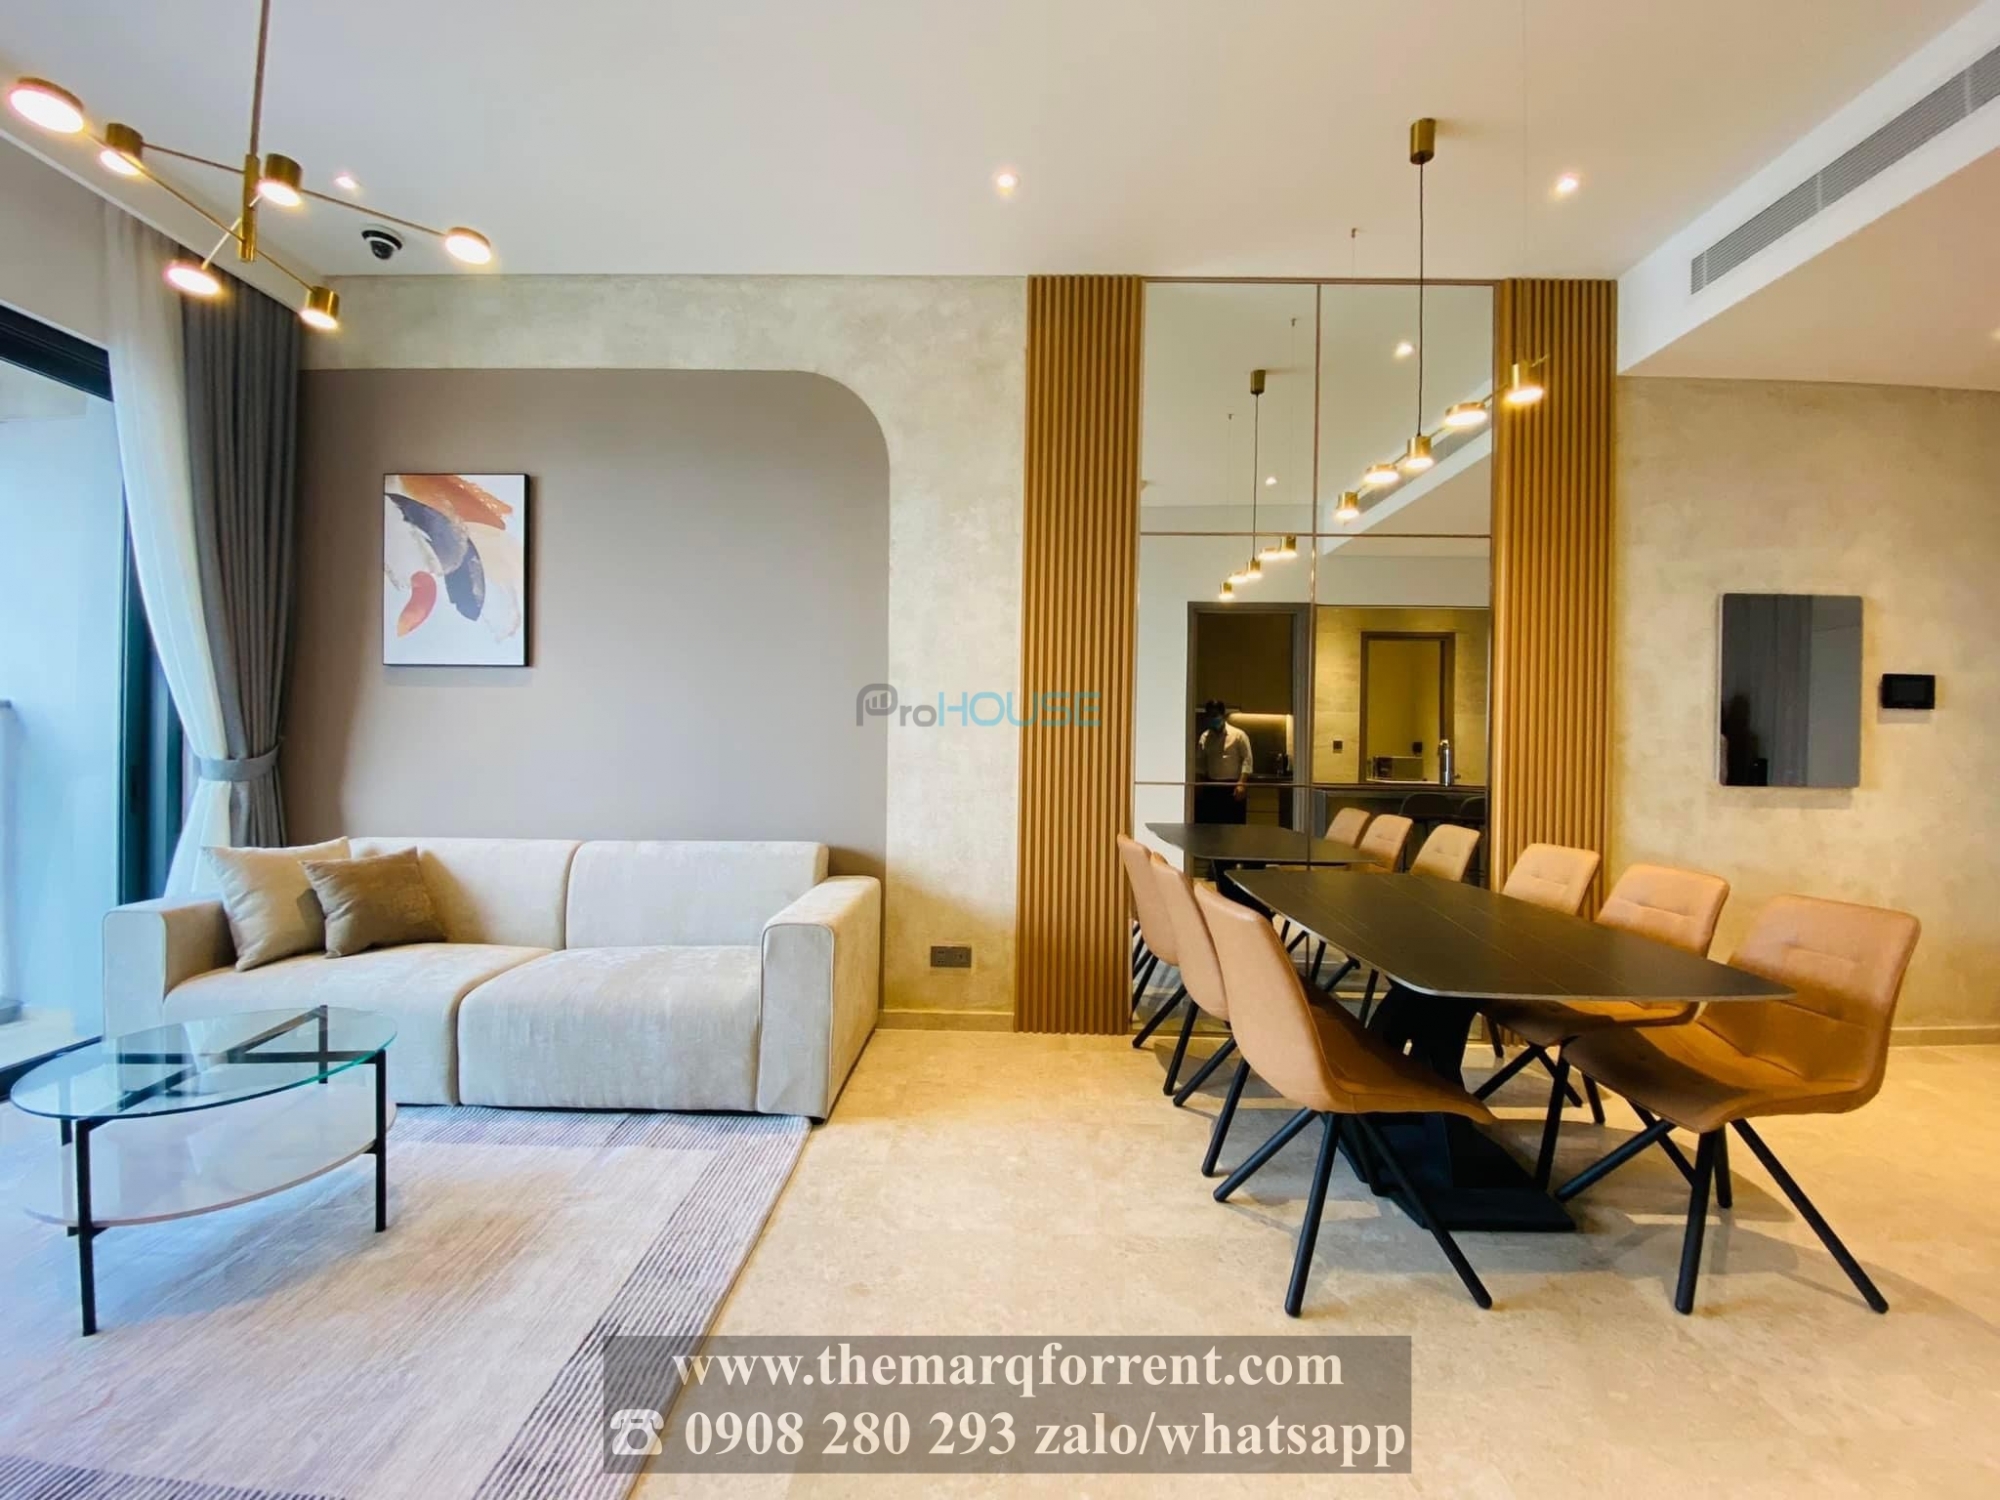 Amazing 3 bedroom apartment for rent in The Marq District 1